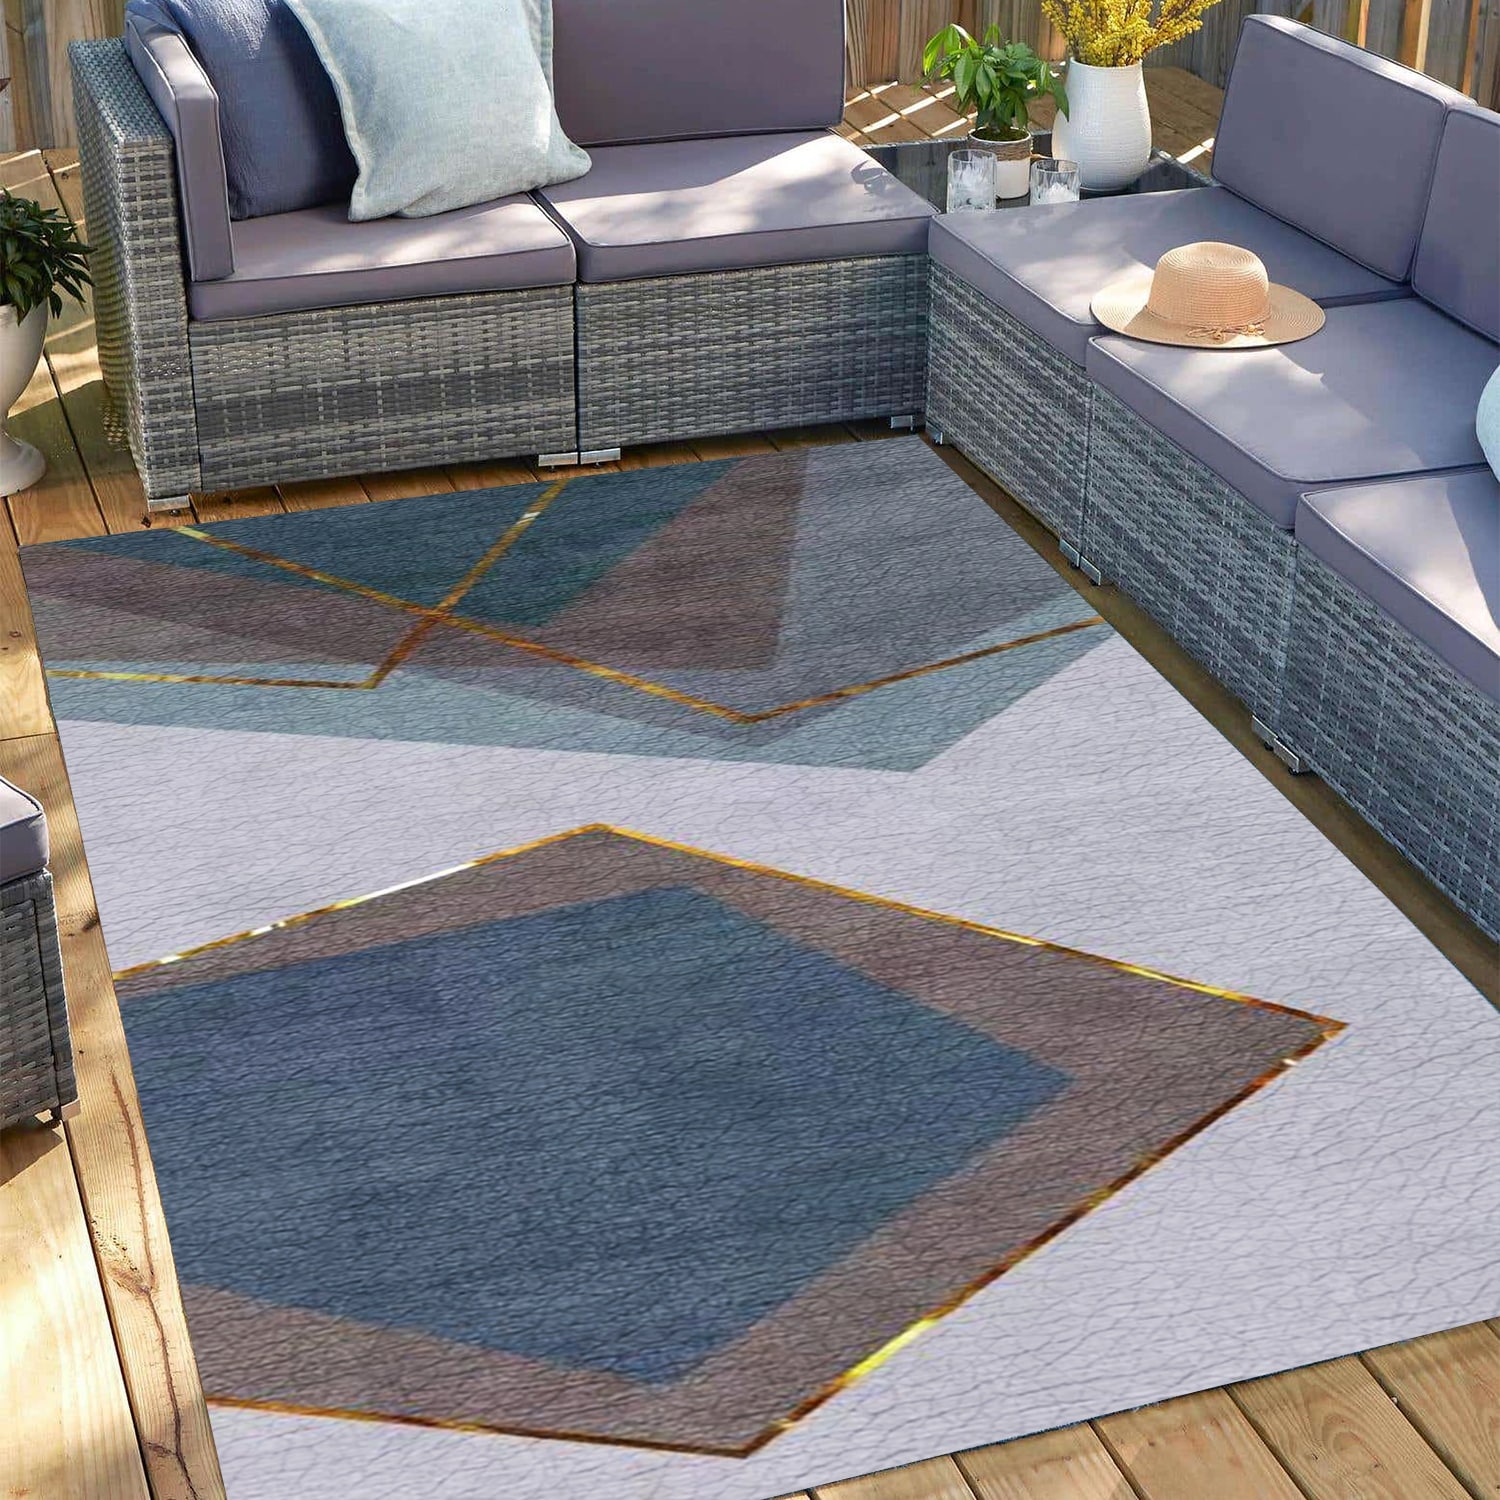 https://ak1.ostkcdn.com/images/products/is/images/direct/2bf5bf1bddcefccd325f67d9df3a6709450854c2/Indoor--Outdoor-Area-Rugs%2CWaterproof-Camping%2C-Patio%2C-RV%2C-Picnic%2C-Deck%2C-Backyard-Rug.jpg